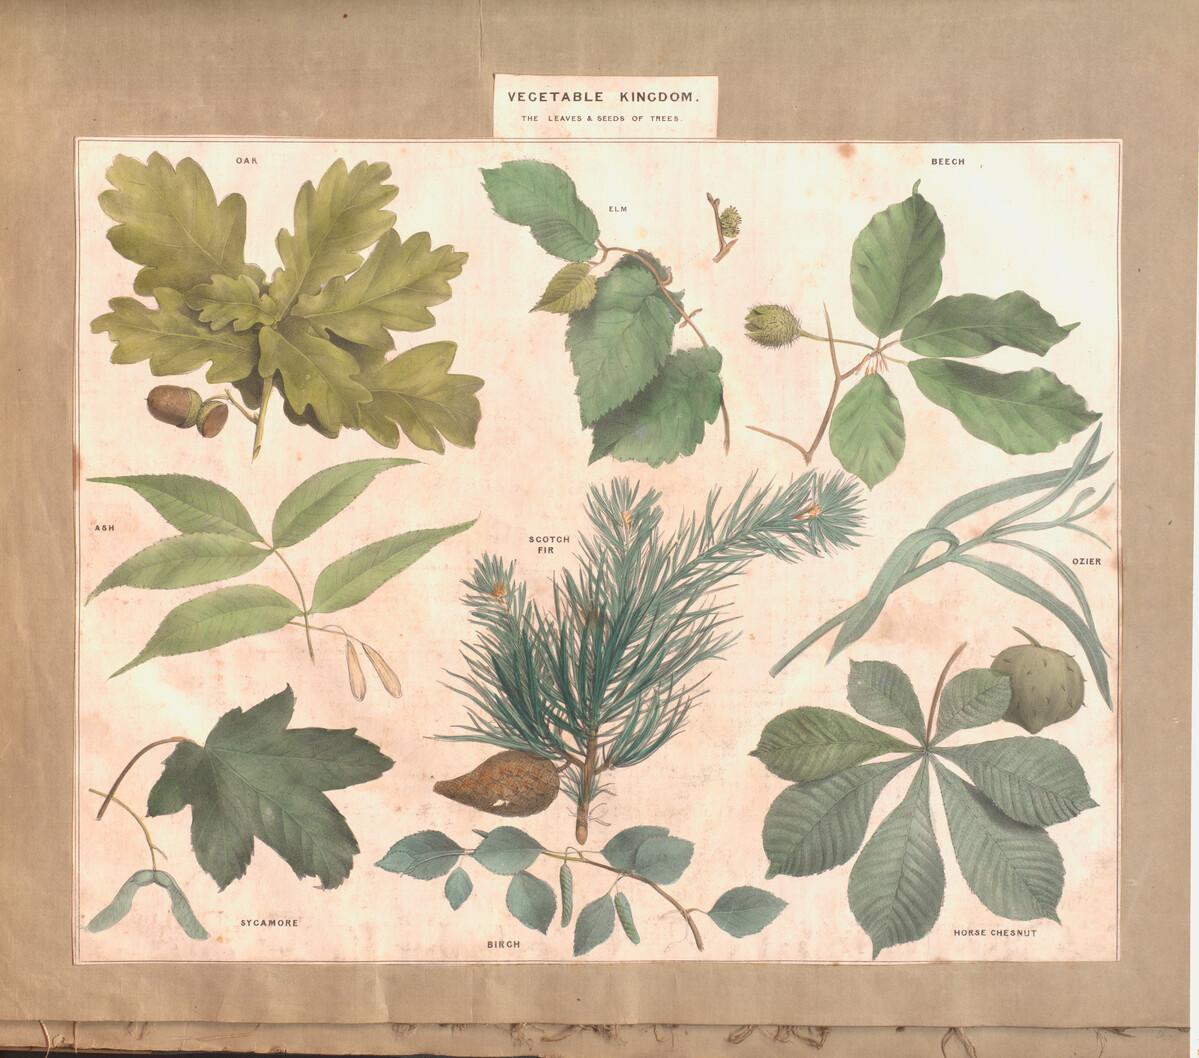 Vegetable Kingdom page from a scrapbook. The page shows the leaves and seeds of trees such as oak, elm and beech among others